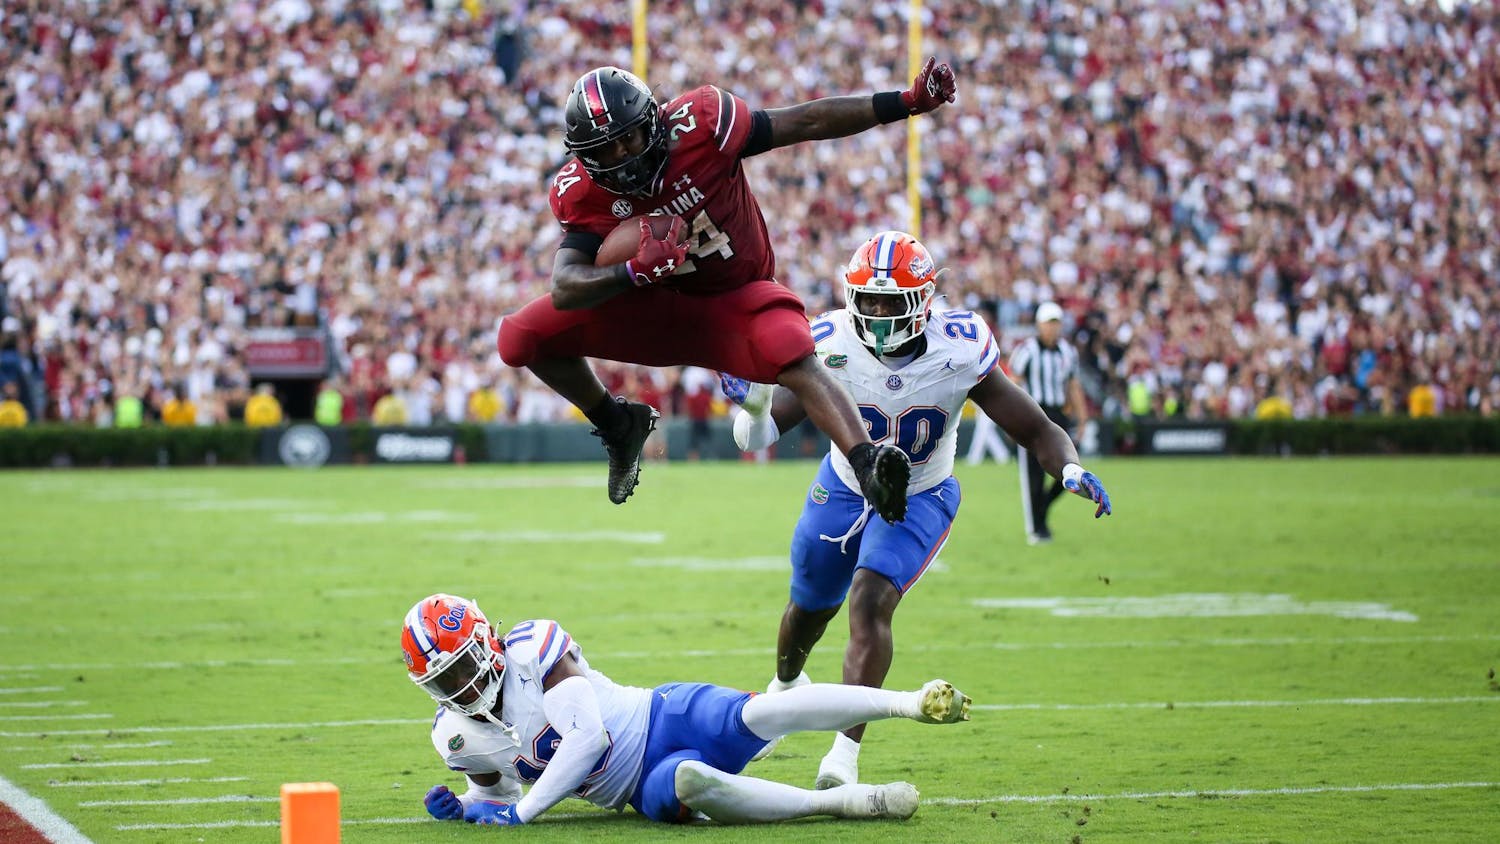 The South Carolina Gamecocks lost to the Florida Gators 41-39 in their fourth Southeastern Conference matchup of the season at Williams-Brice Stadium on Oct. 14, 2023. This loss puts the Gamecocks at 2-4 for the season.